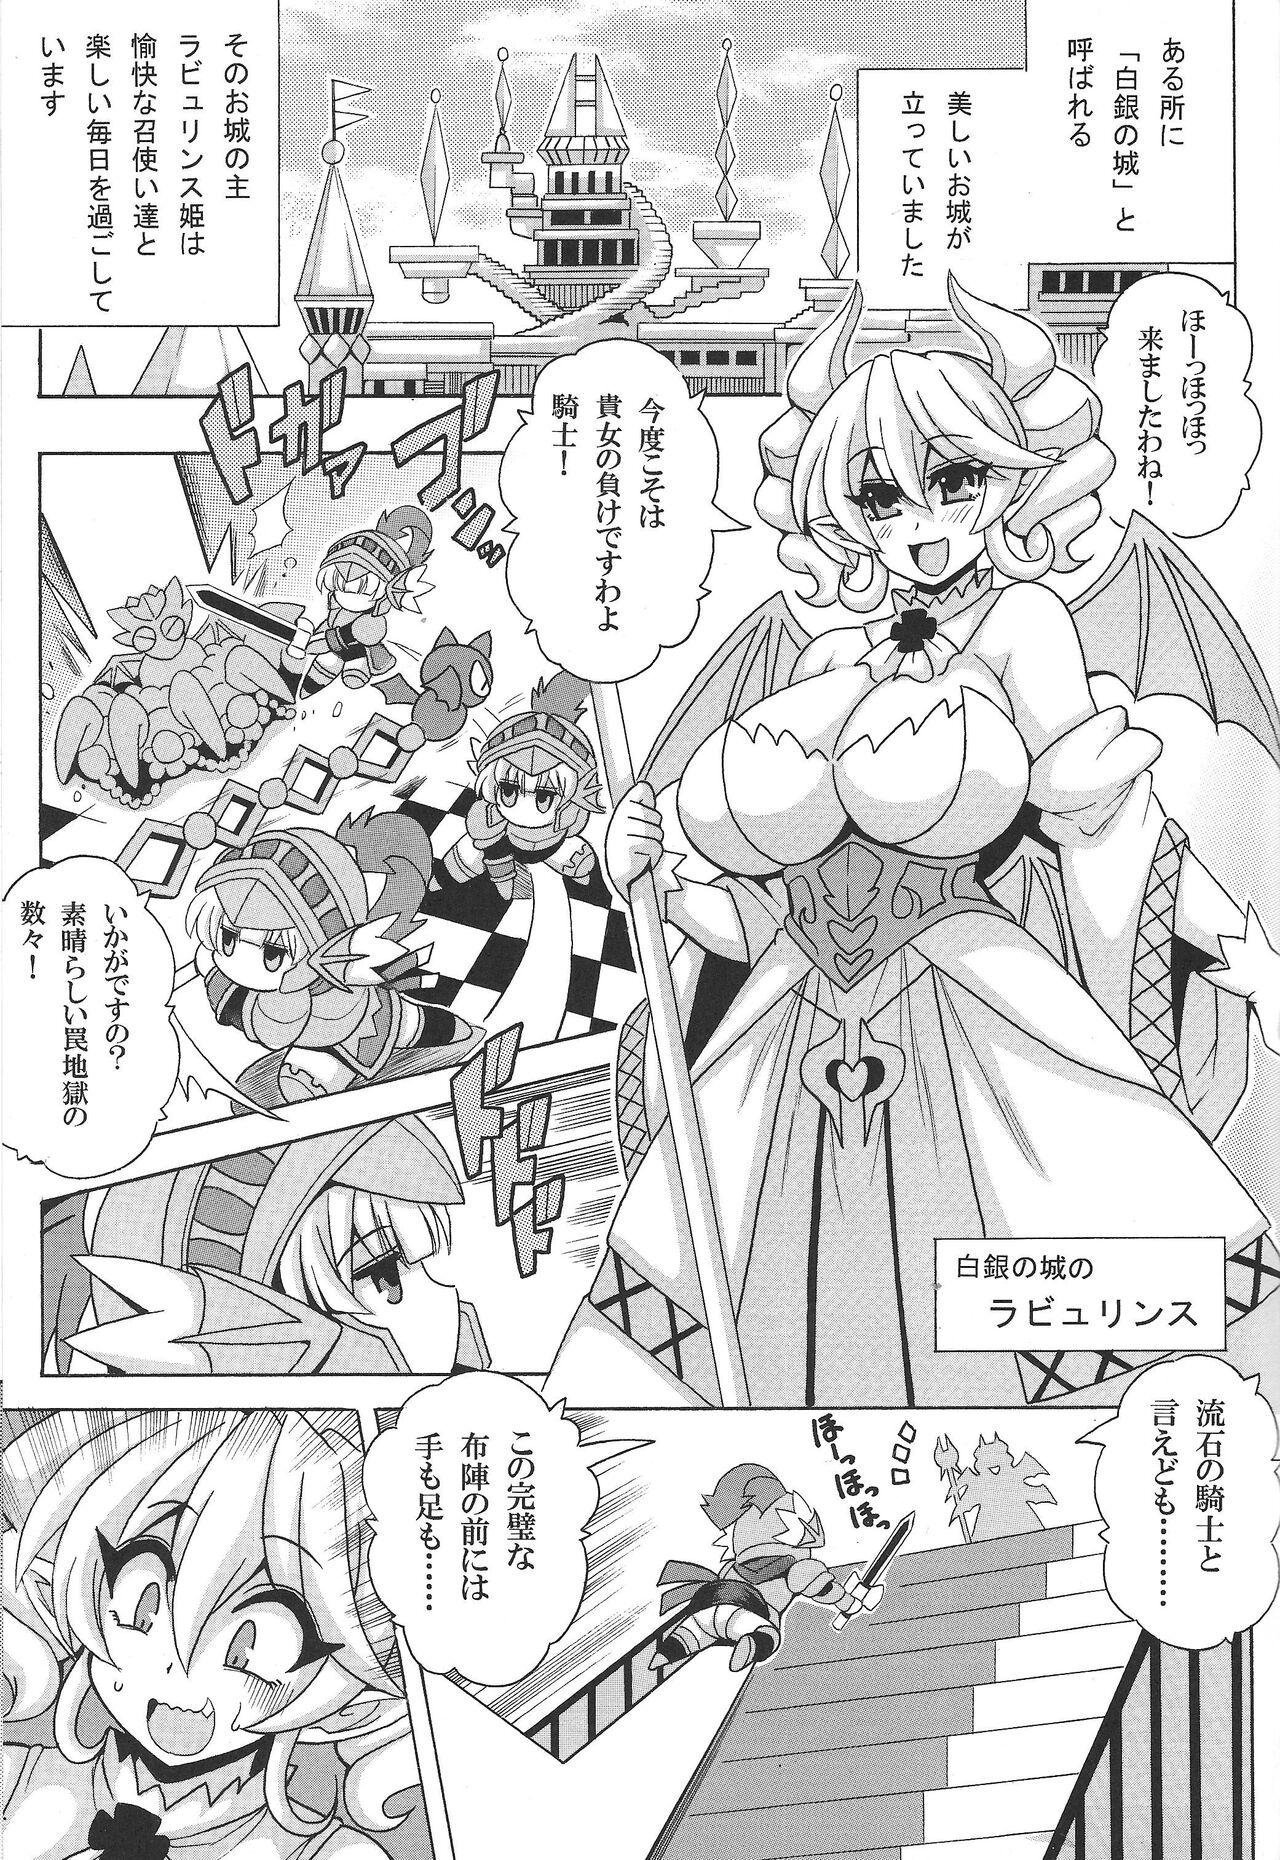 Cosplay LABRYNTH MILK - Yu-gi-oh Small Tits - Page 2